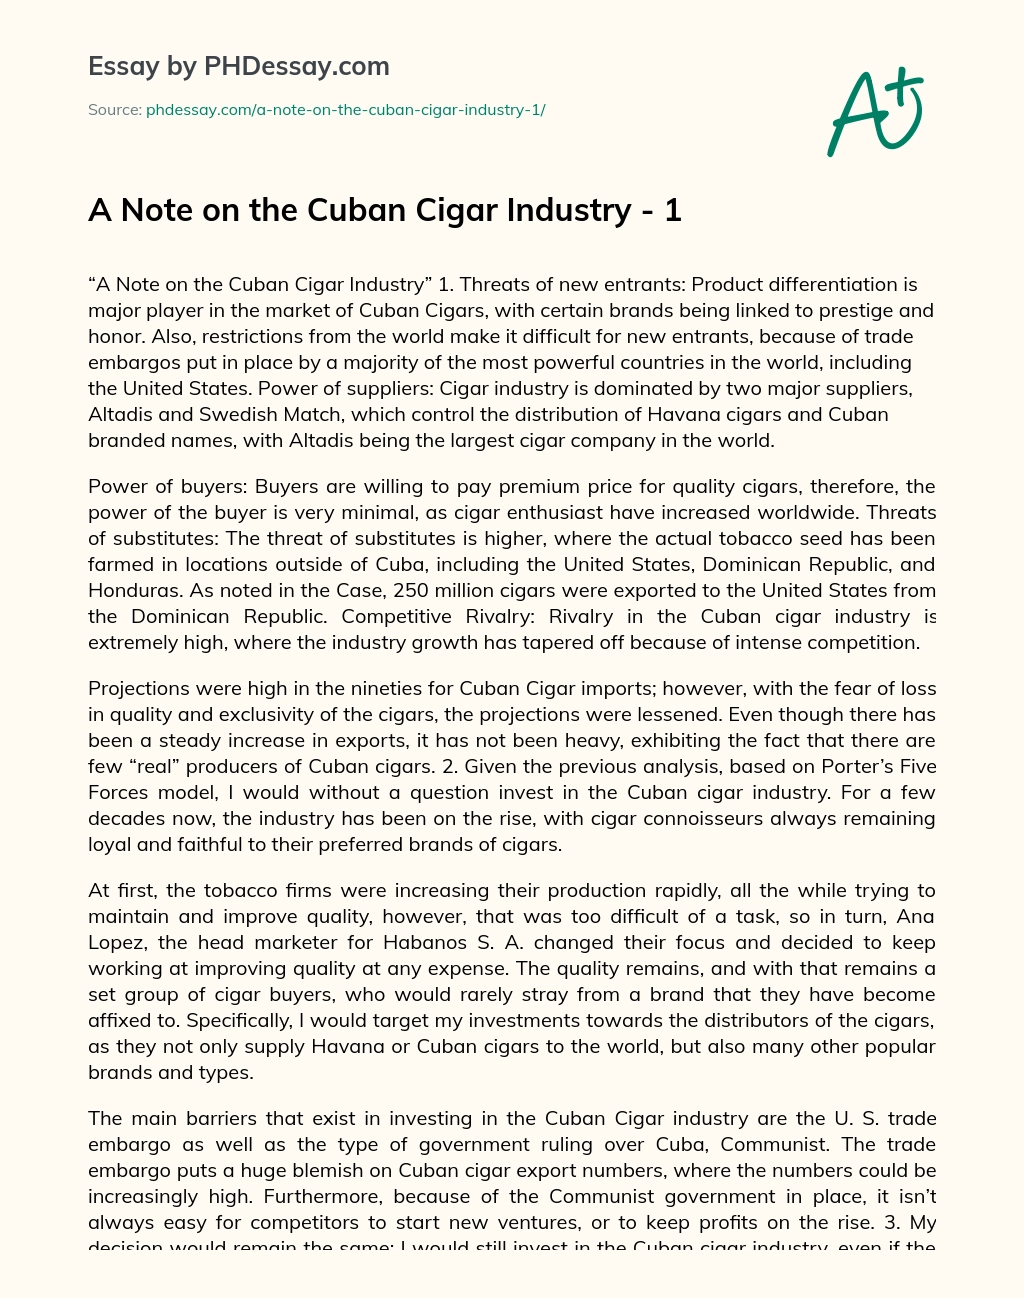 A Note on the Cuban Cigar Industry essay